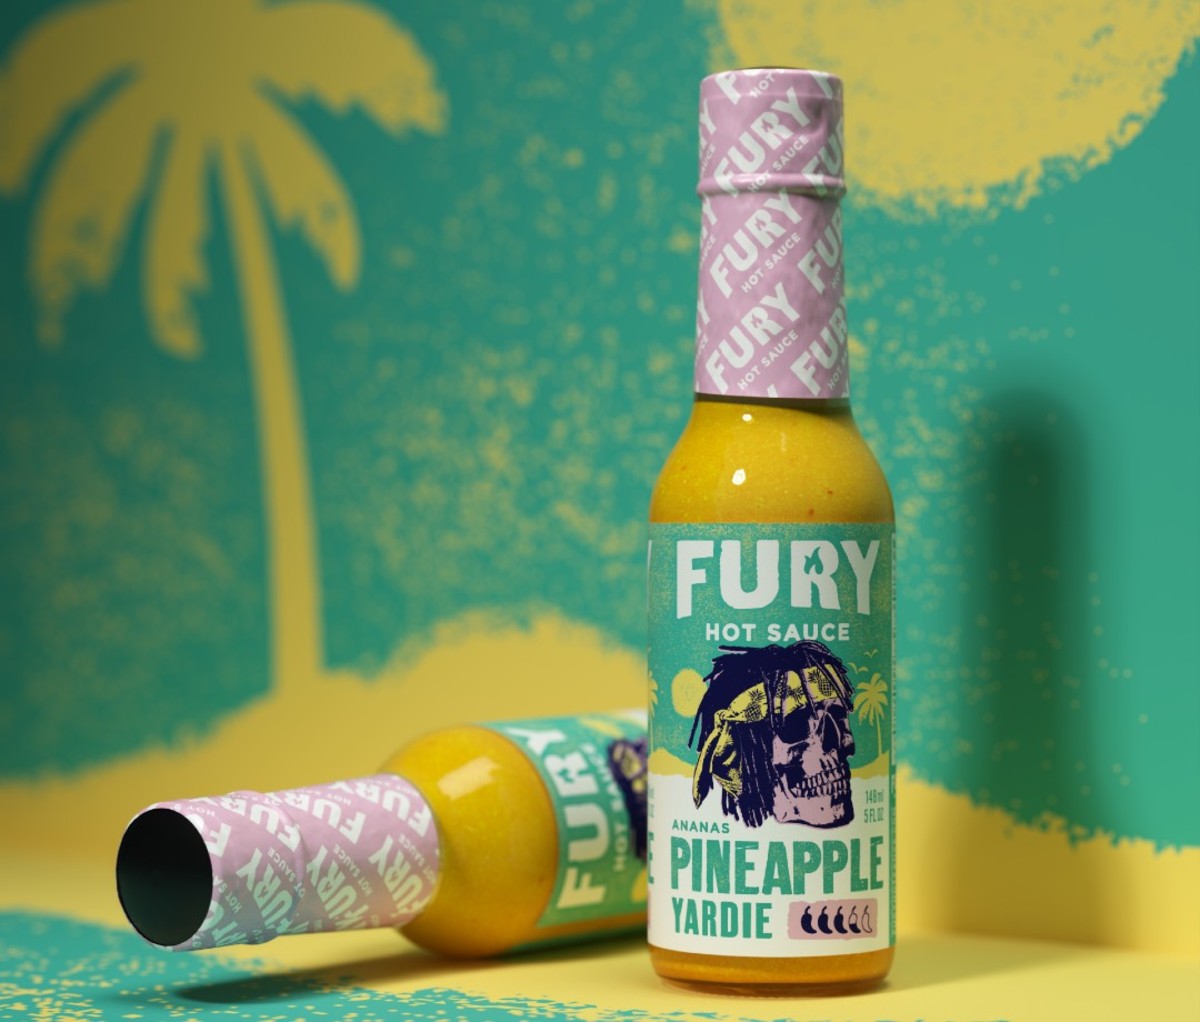 Fury Hot Sauce Pineapple Yardie against green and yellow tropical wallpaper